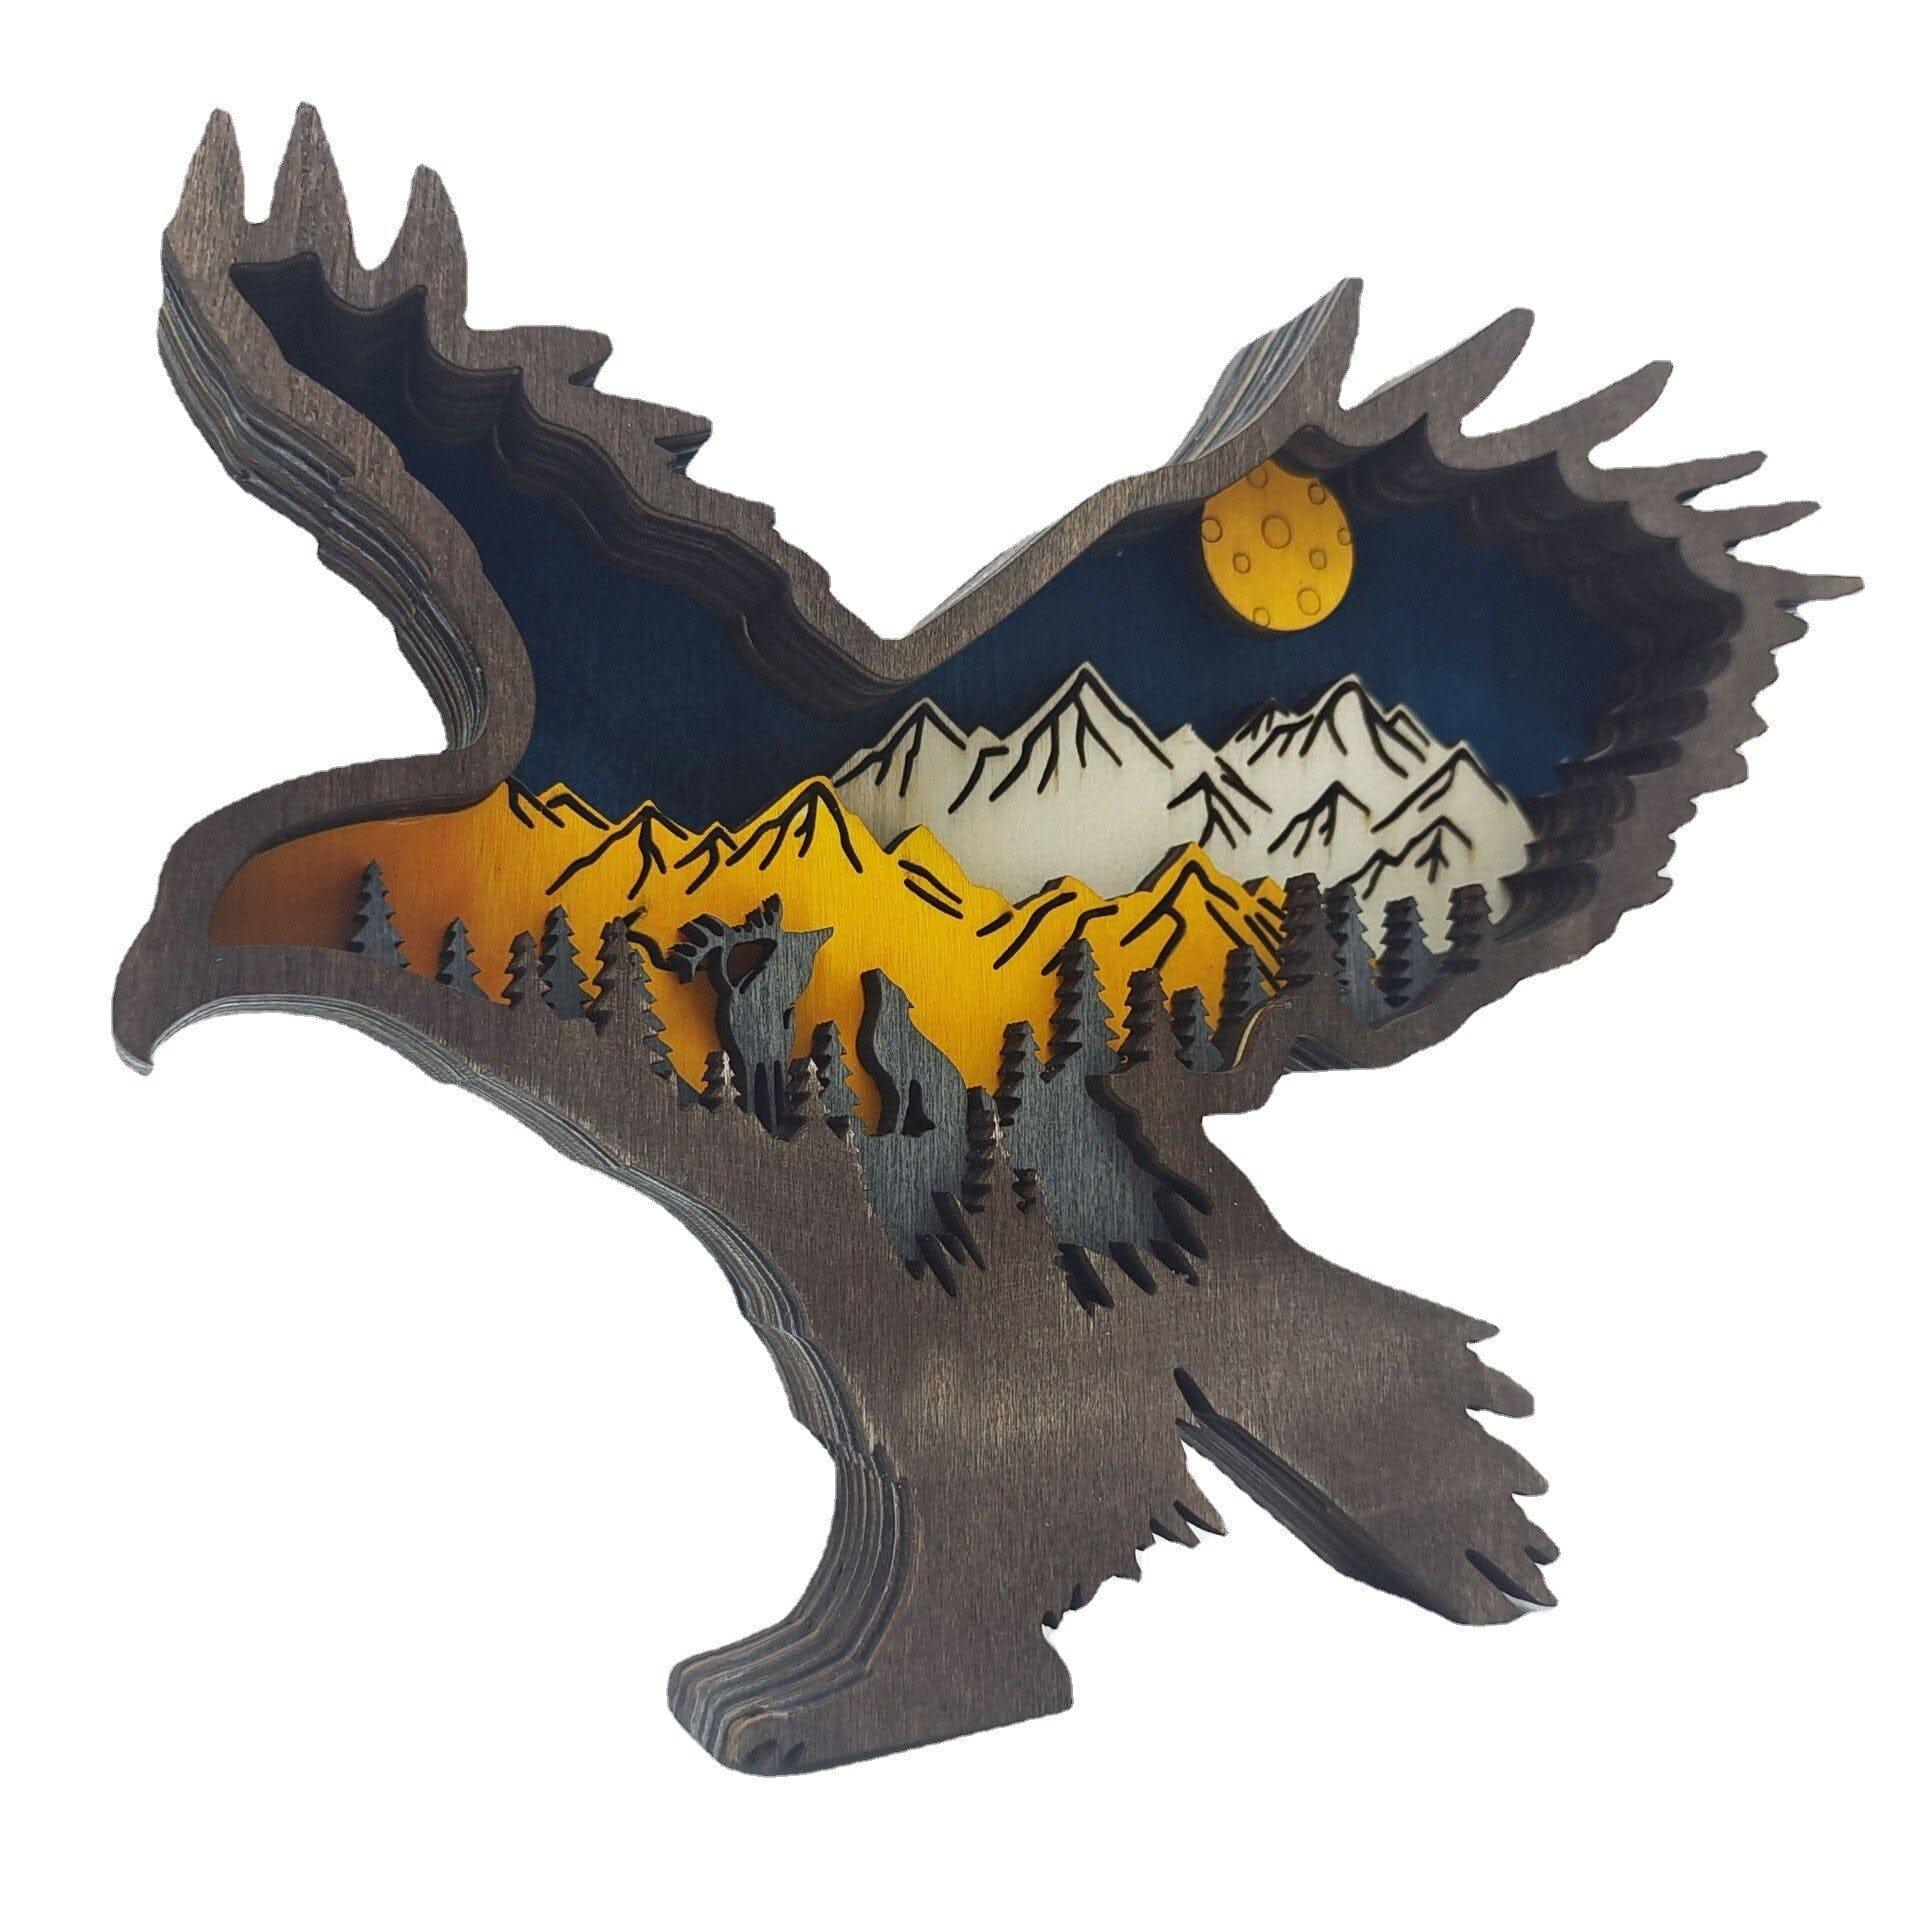 Shop 0 Wooden Carved Eagle Wood Animal Statue Preferment Gift Home Decor Ornaments Mademoiselle Home Decor